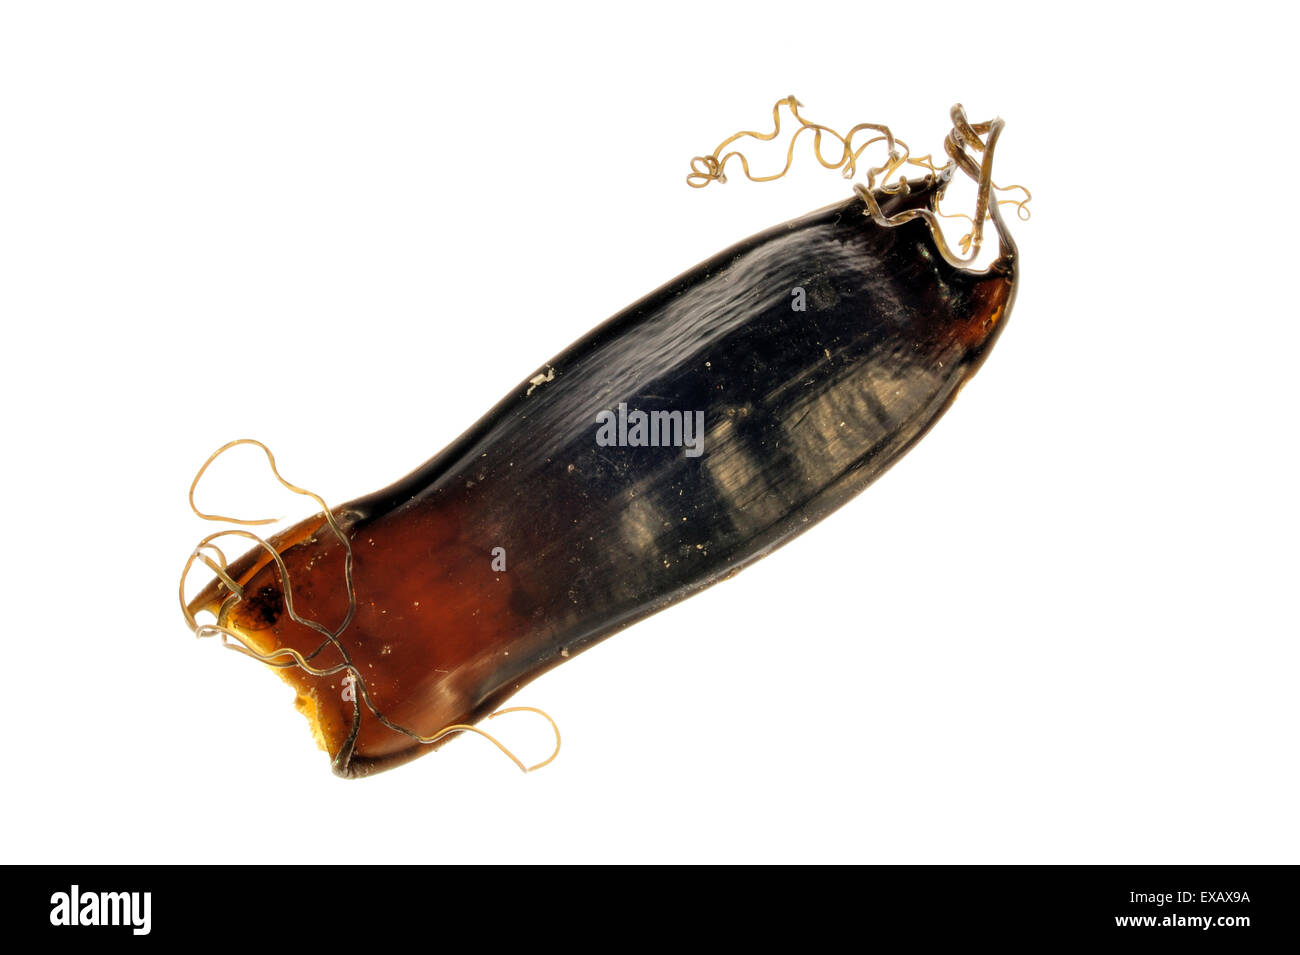 Egg case / mermaids purse of a Small-spotted catshark / Lesser spotted dogfish (Scyliorhinus canicula) on white background Stock Photo